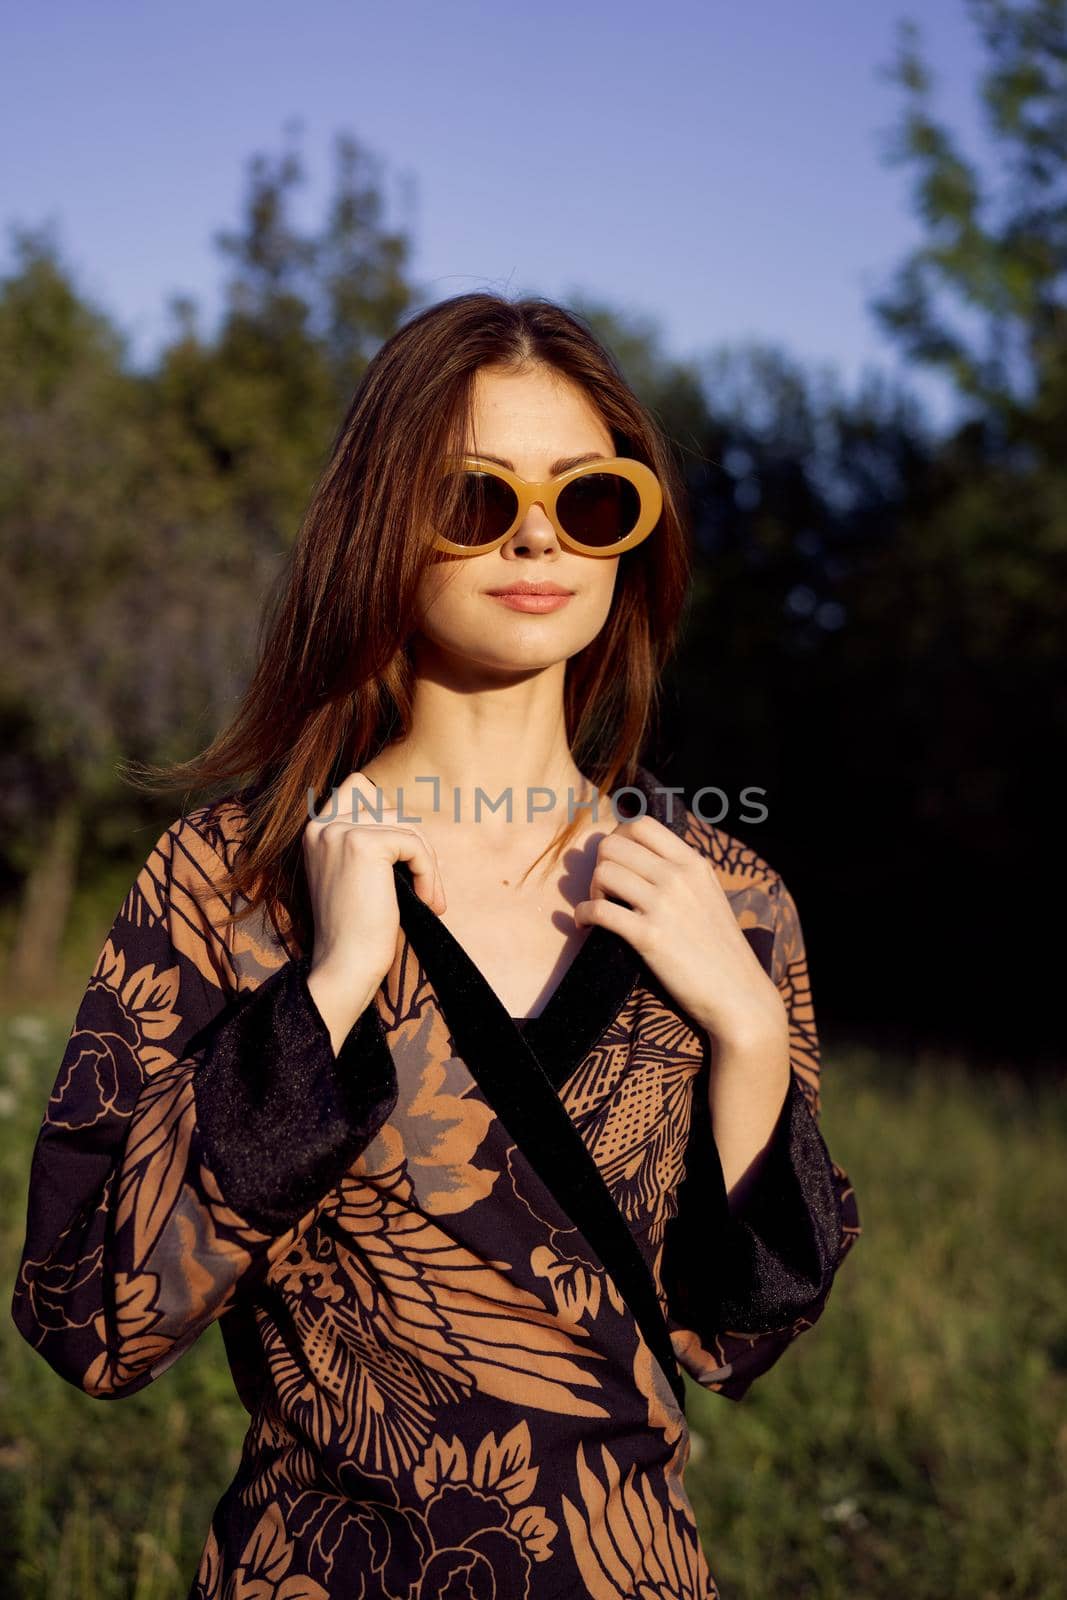 fashionable woman in sunglasses outdoors summer glamor by Vichizh